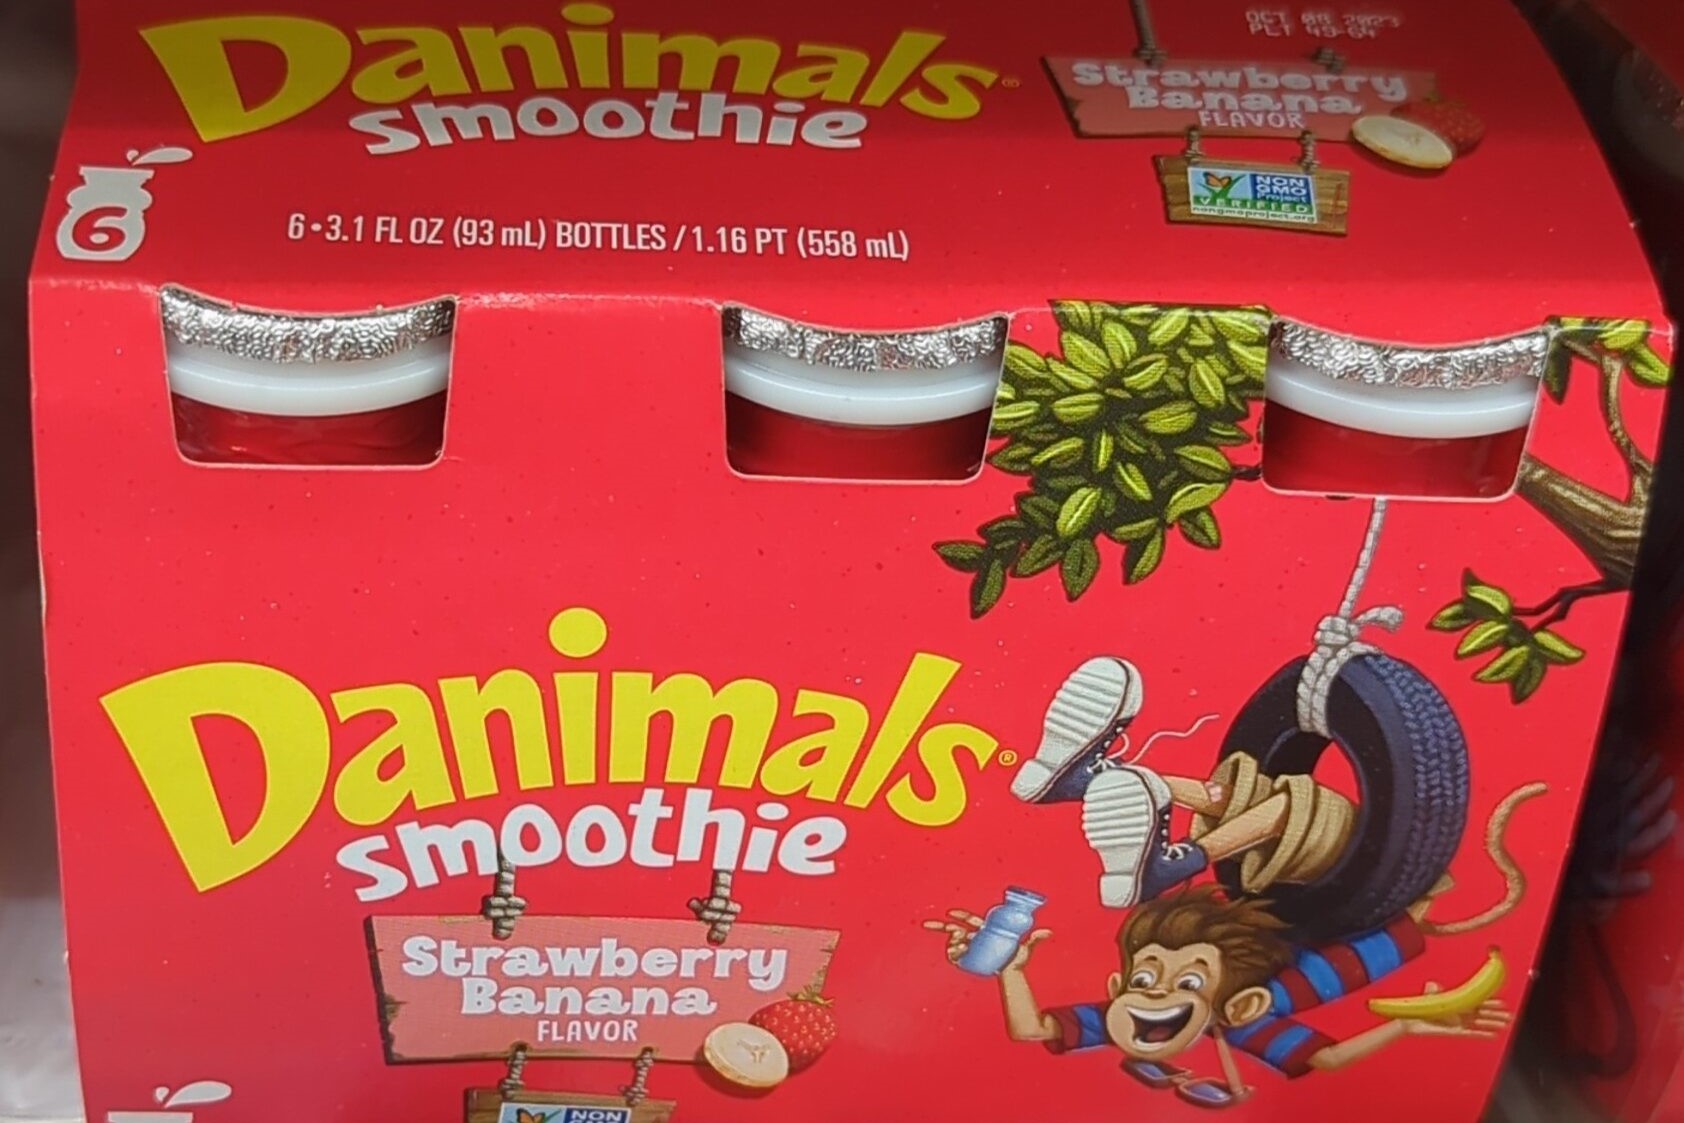 19-danimals-strawberry-banana-smoothie-nutrition-facts